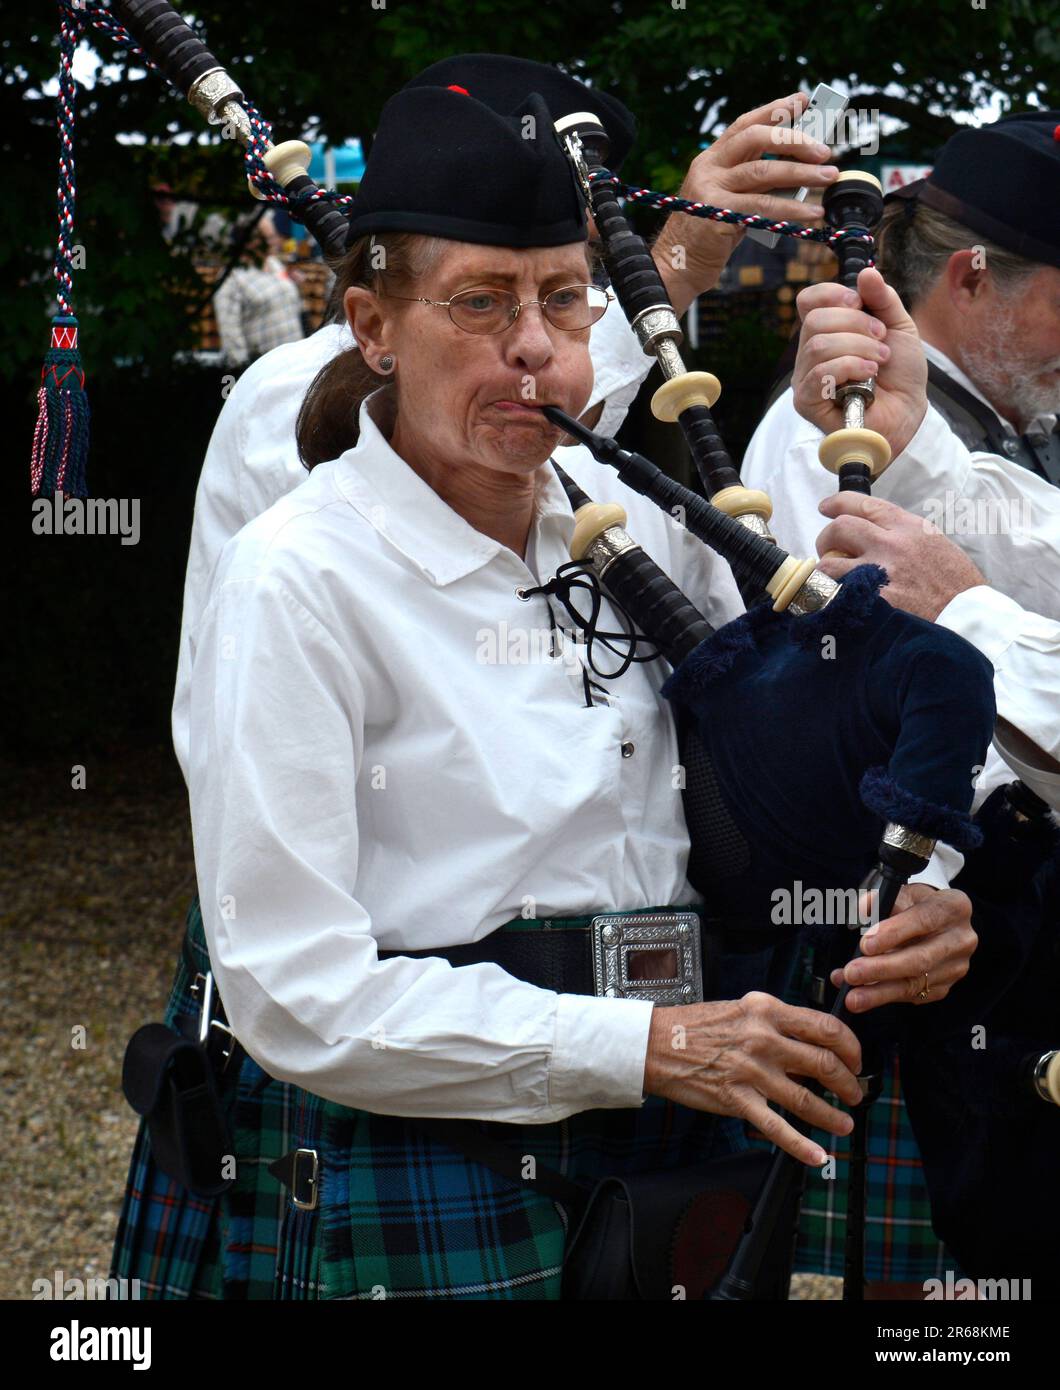 Members of the Appalachian Highlanders Pipes and Drums tune their bagpipes as the prepare to particpate in a public event in Abingdon, Virginia. Stock Photo